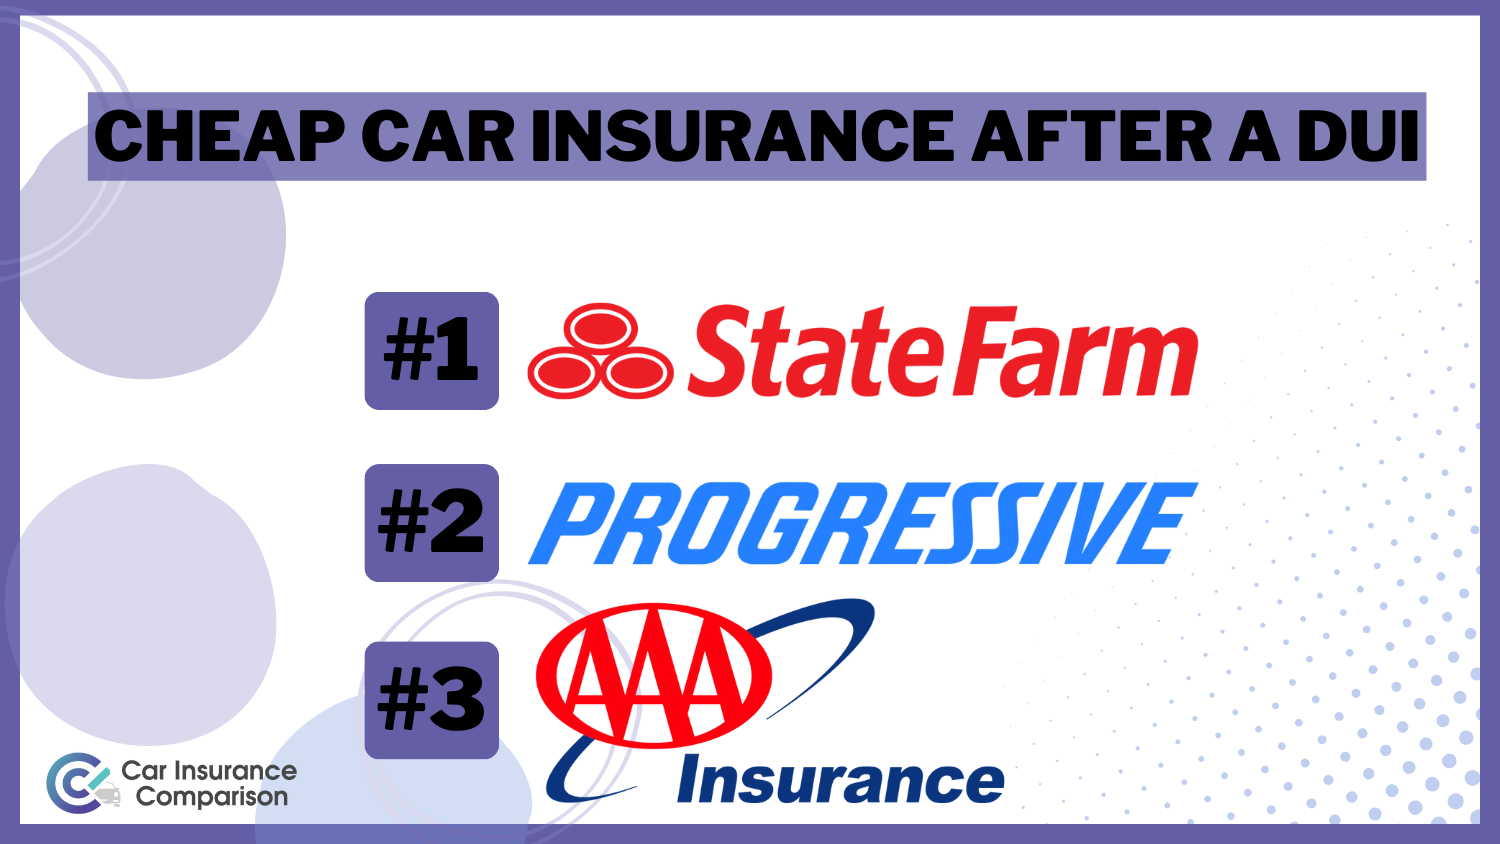 State Farm, Progressive and AAA: Cheap Car Insurance After a DUI